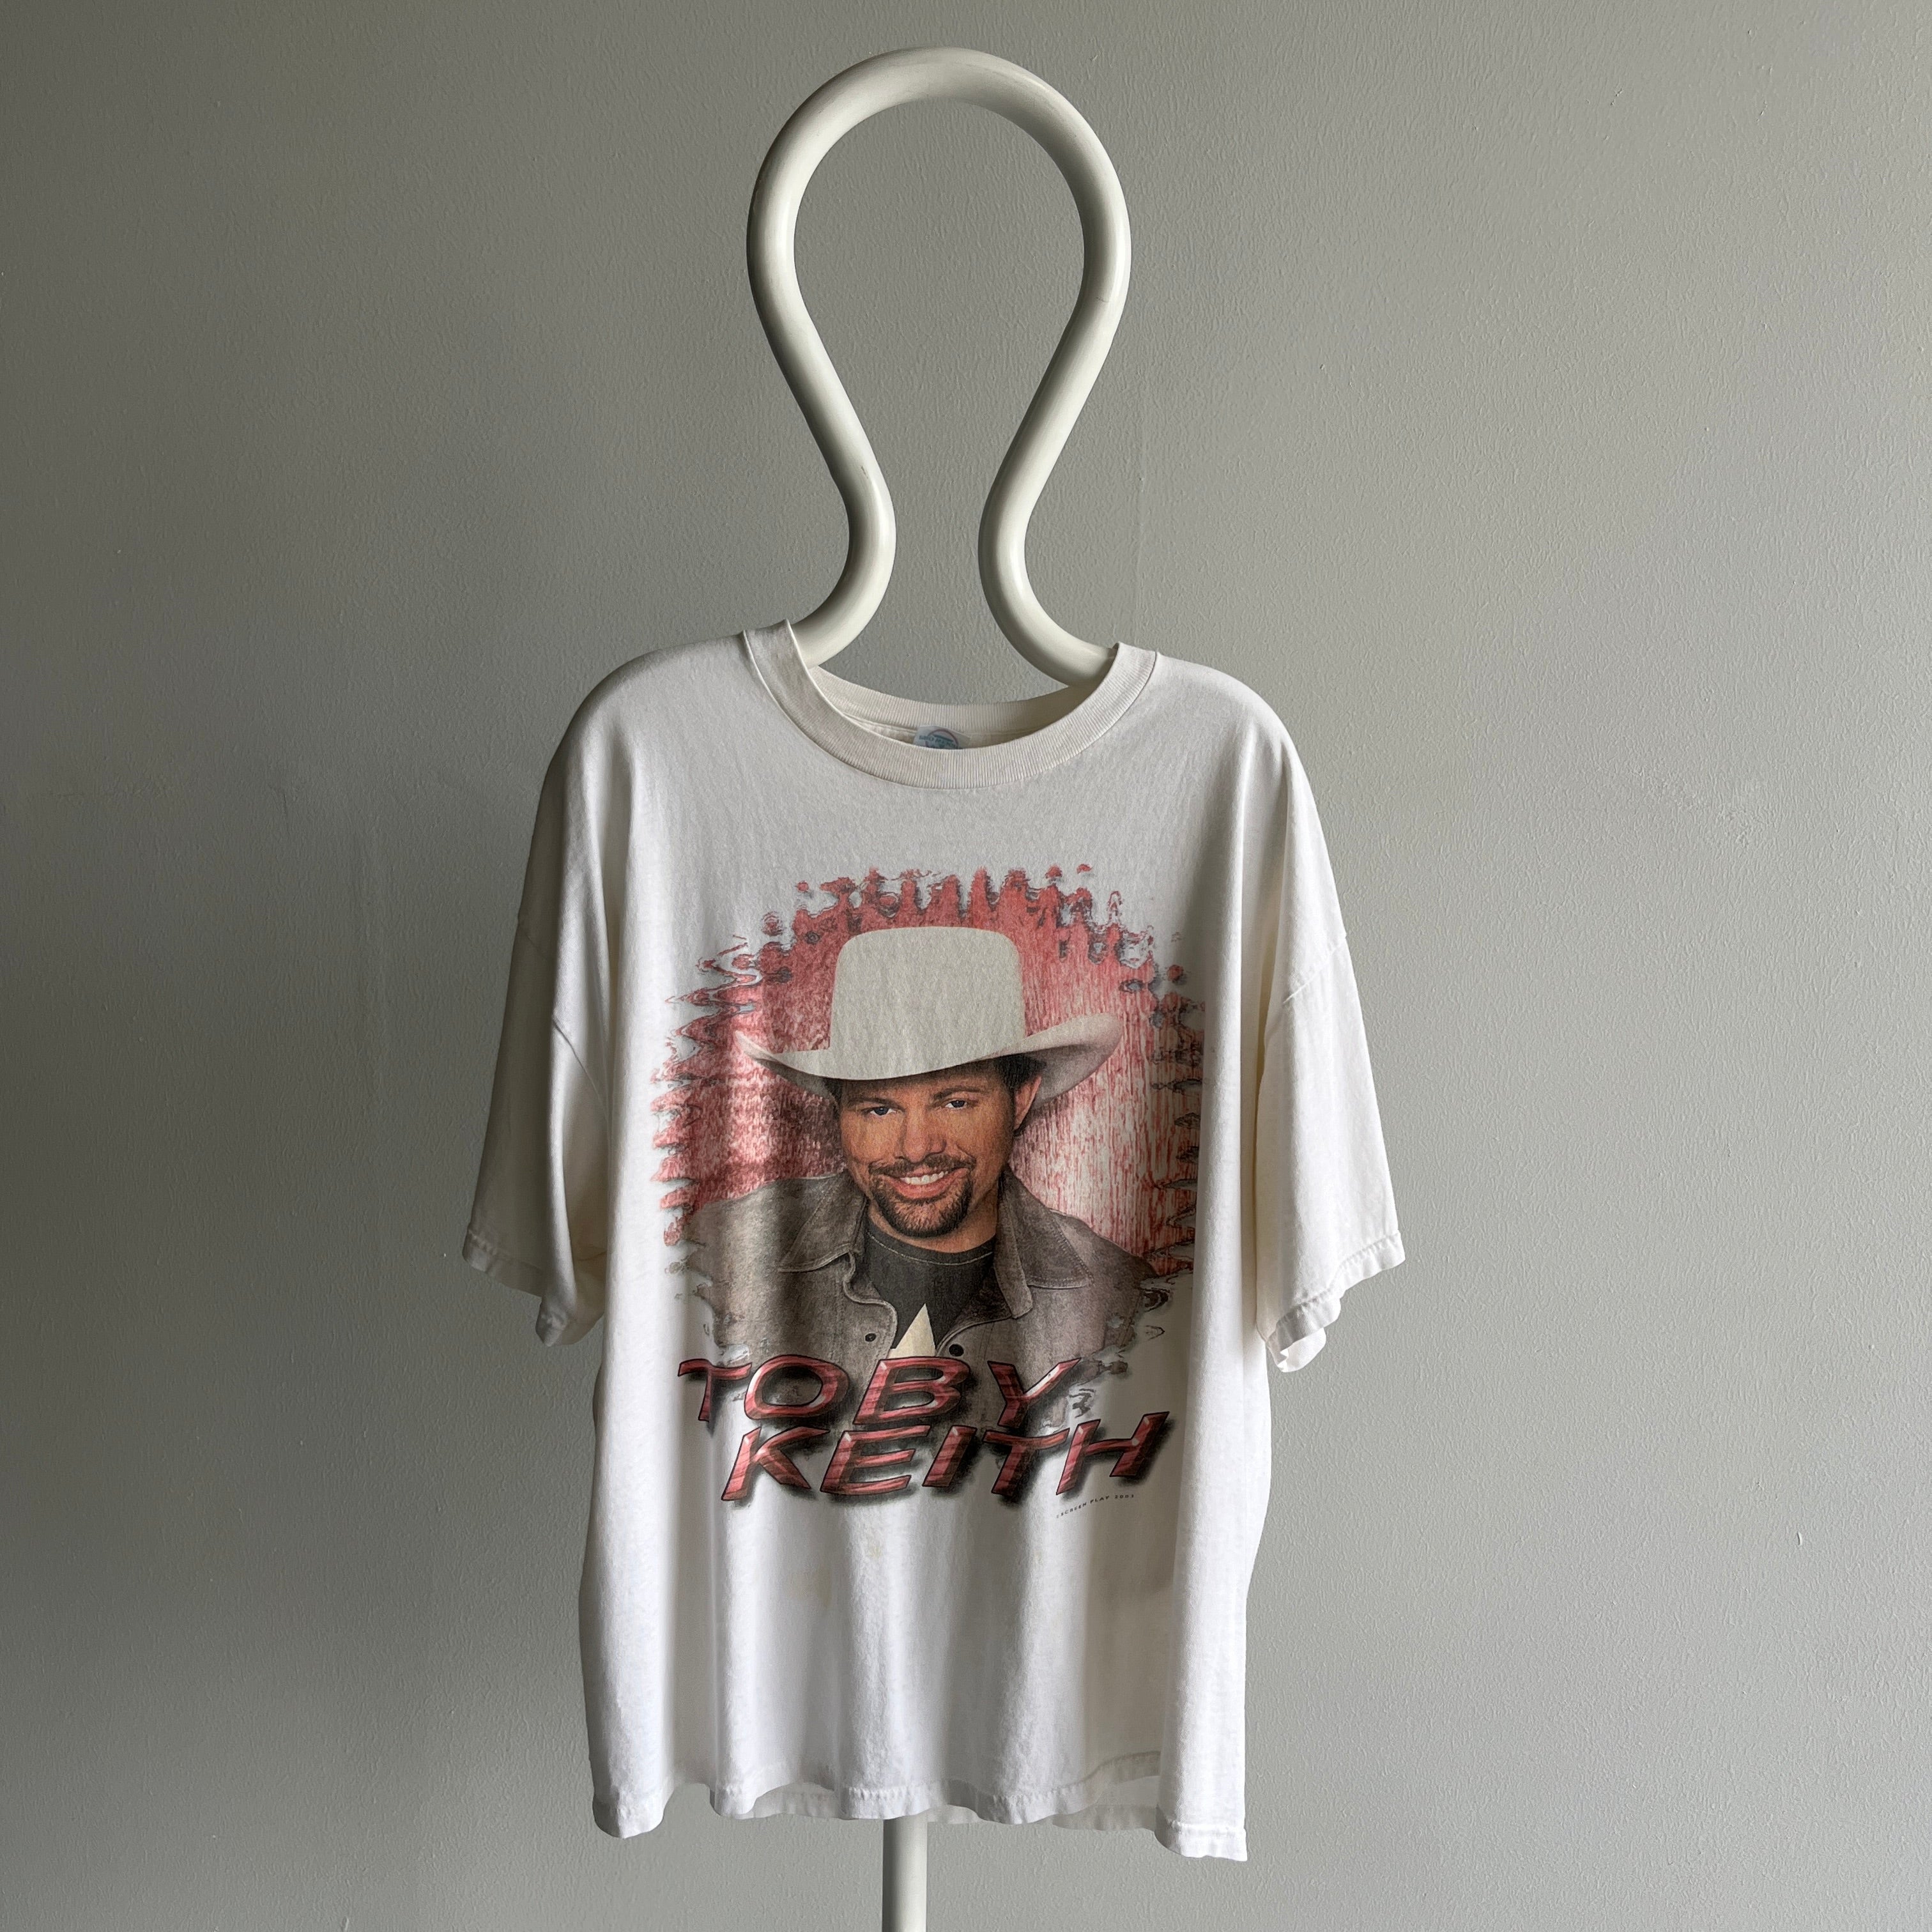 2003 Toby Keith Front and Back Thinned Out and Beat Up T-Shirt